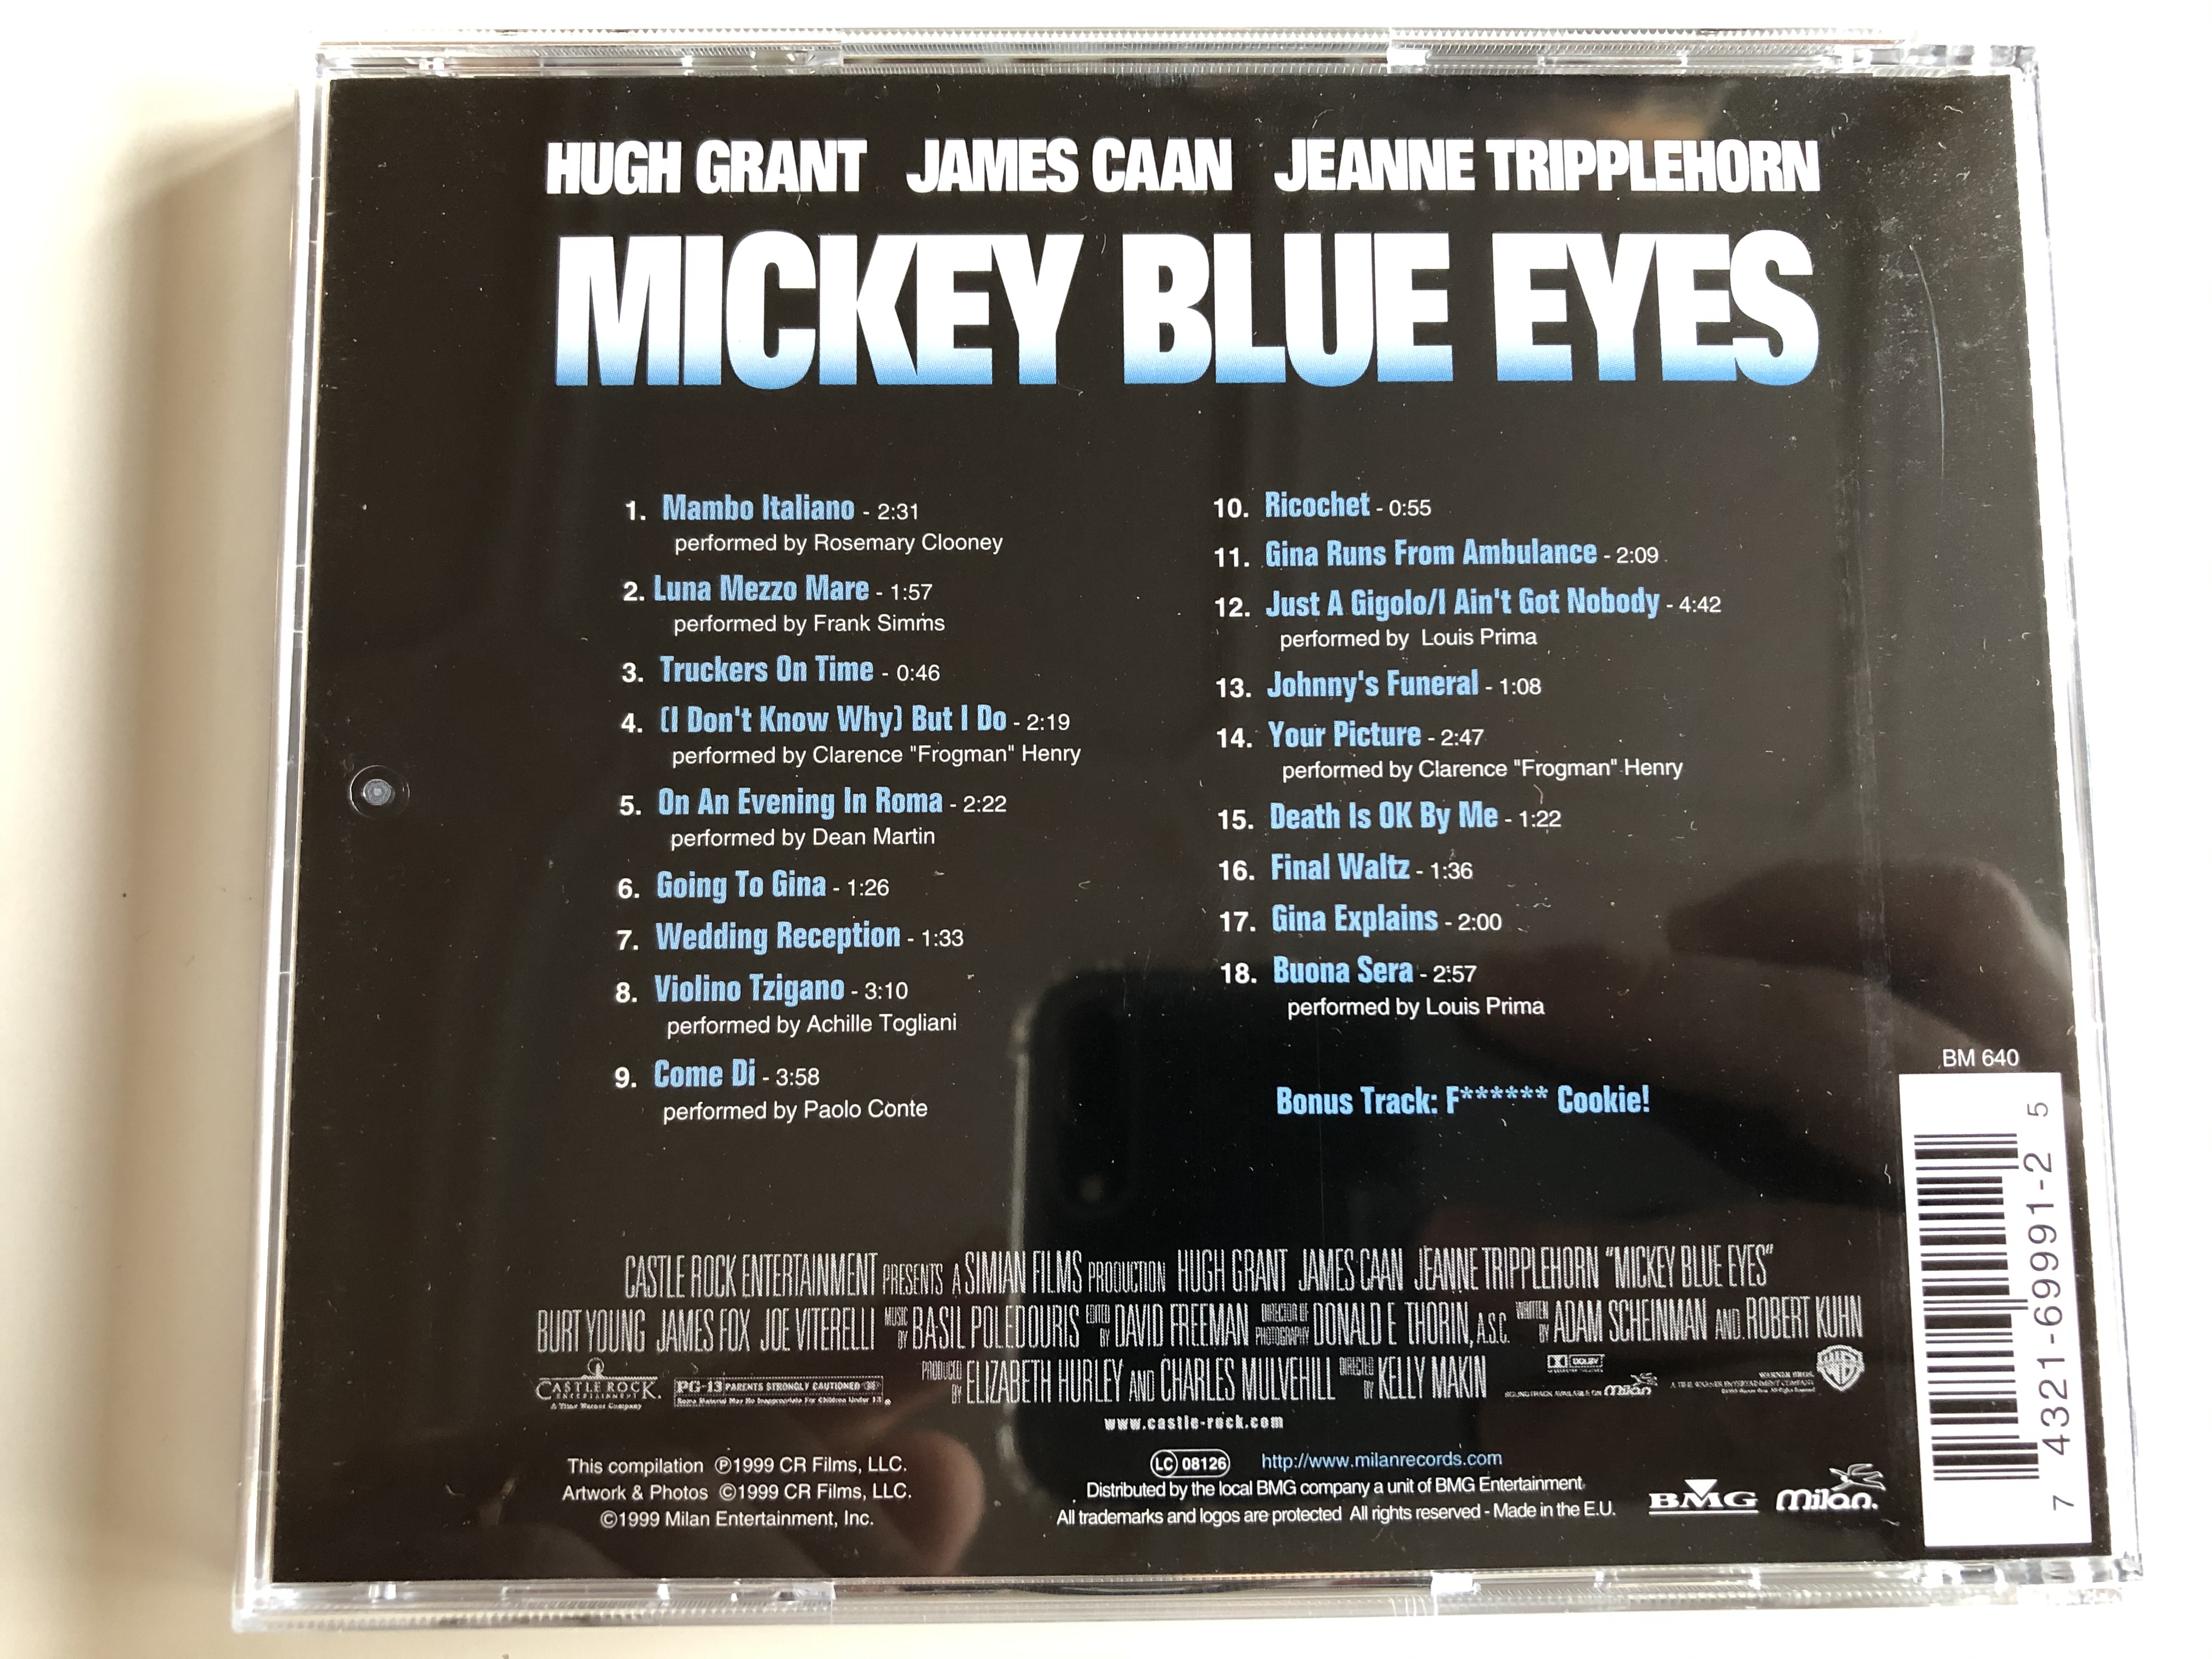 music-from-the-motion-picture-mickey-blue-eyes-milan-audio-cd-1999-74321-69991-2-5-6-.jpg